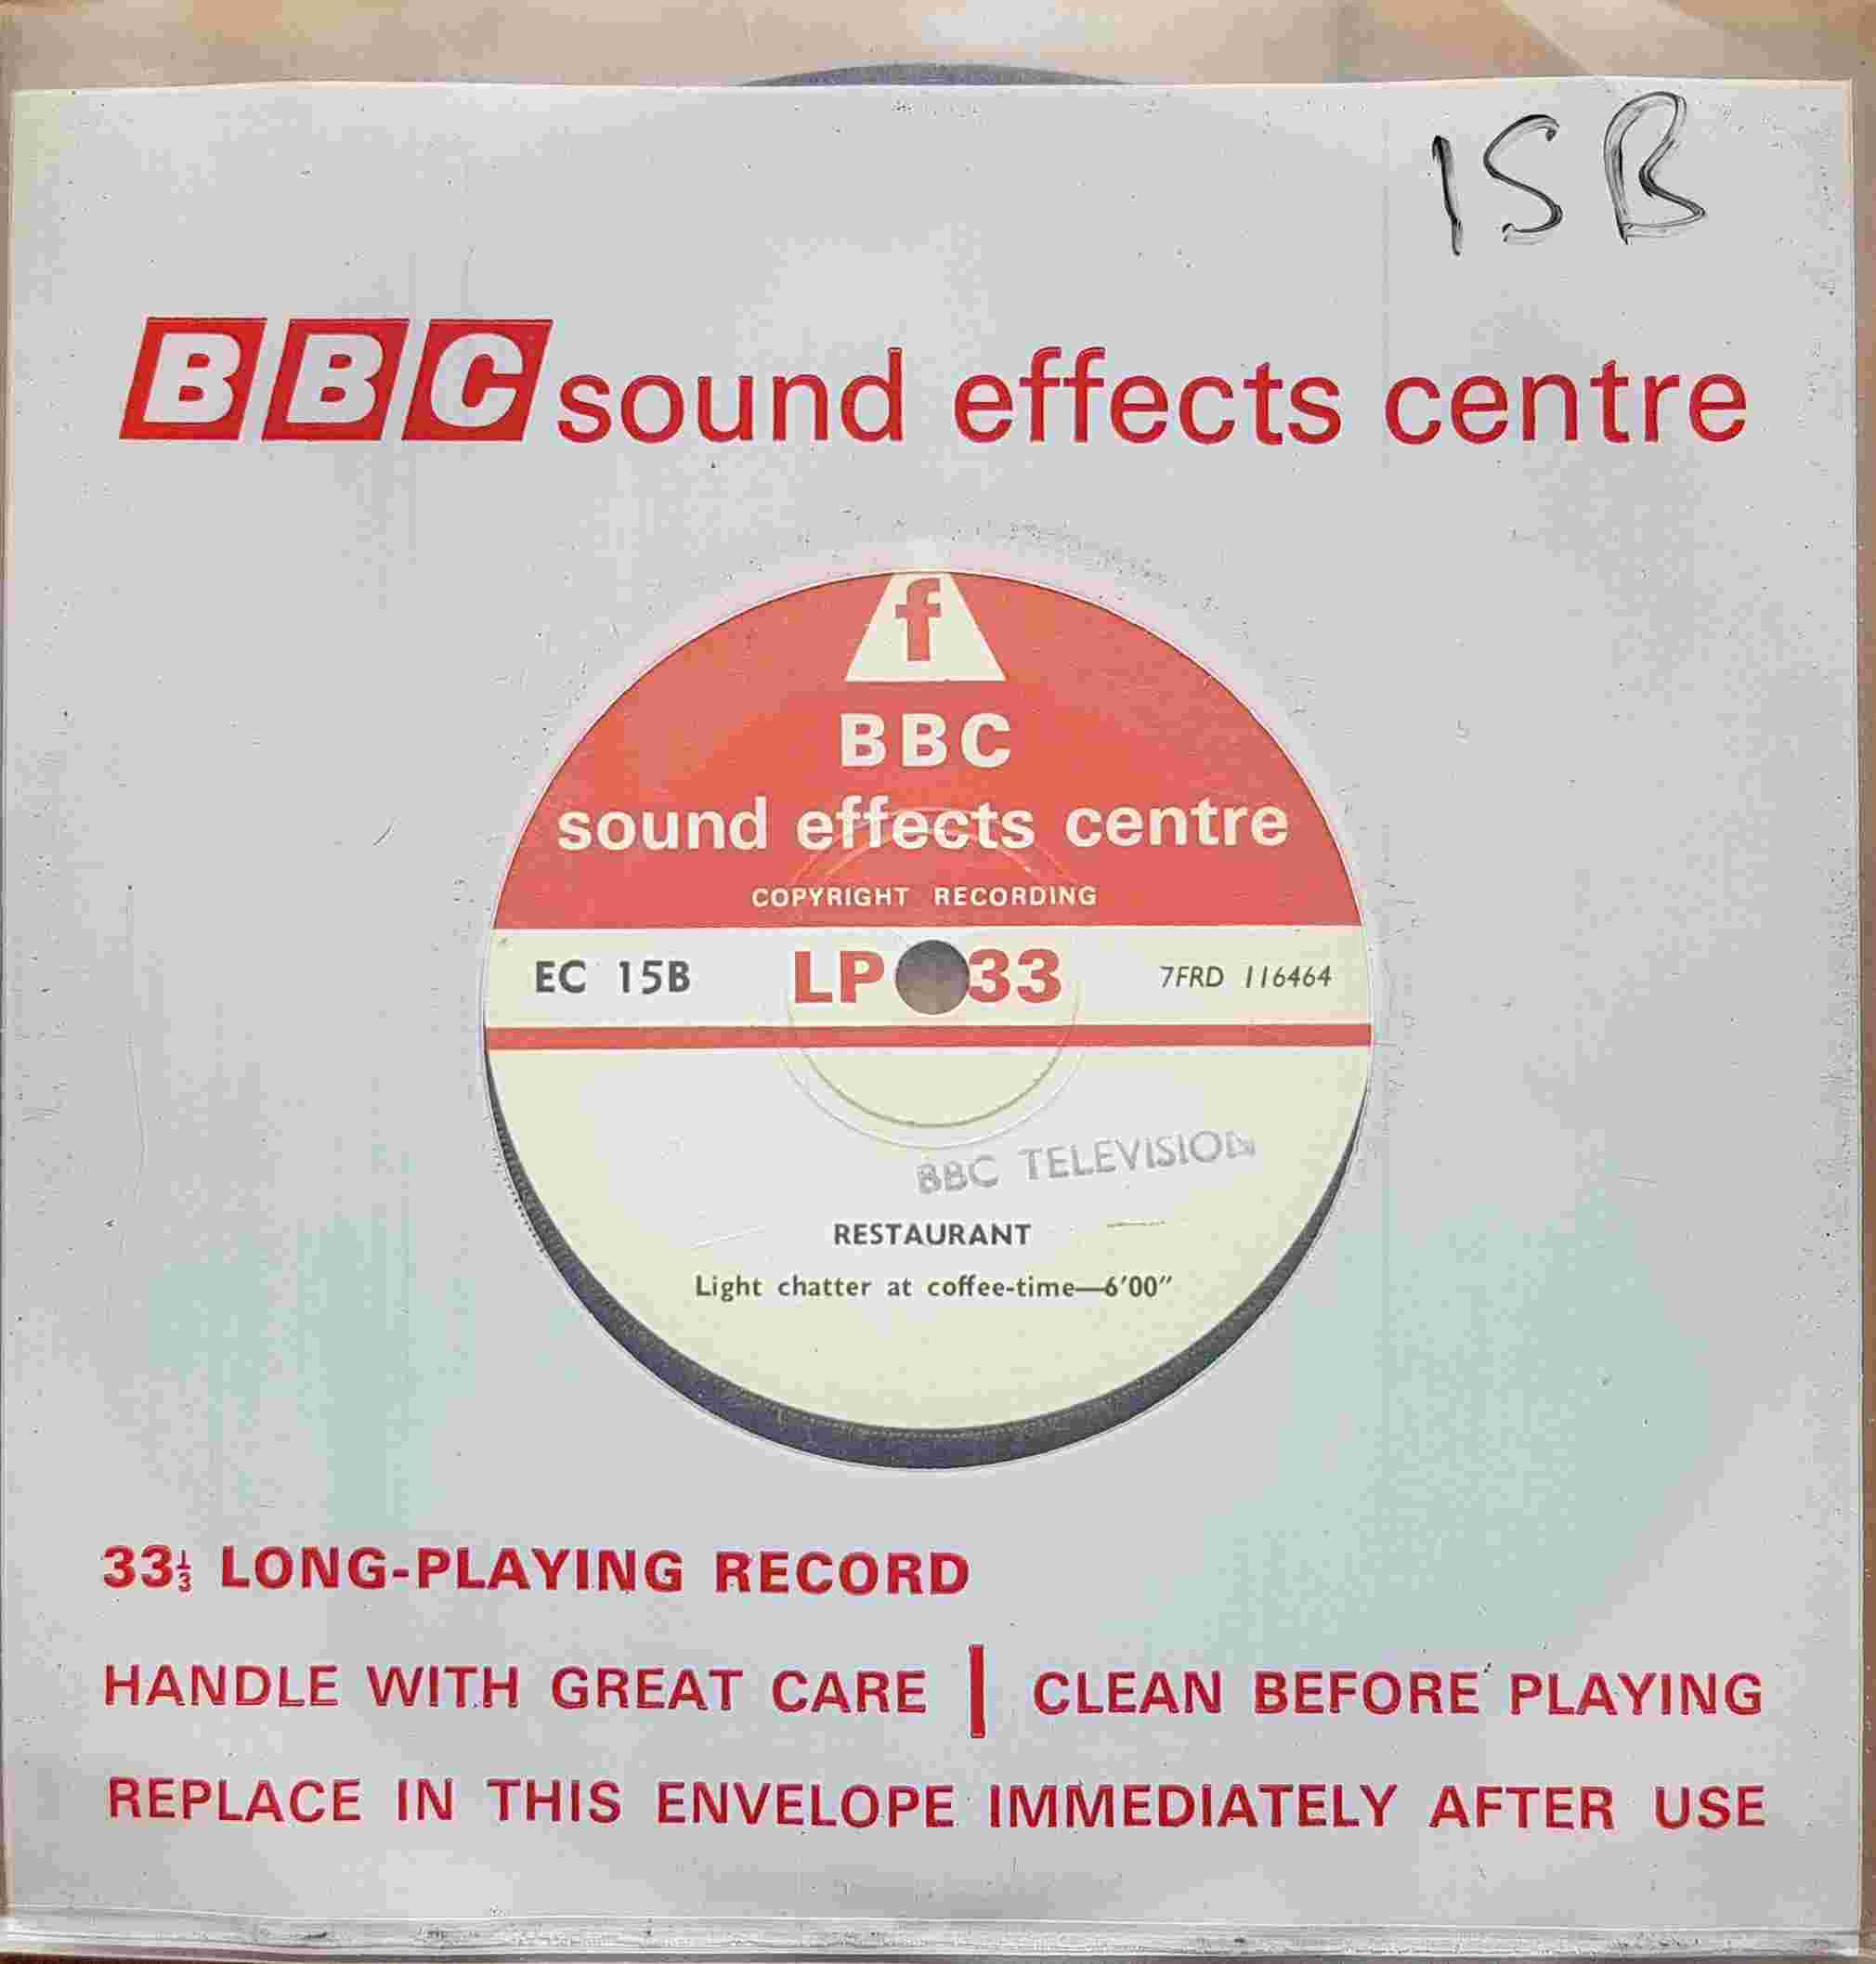 Picture of EC 15B Restaurant by artist Not registered from the BBC singles - Records and Tapes library